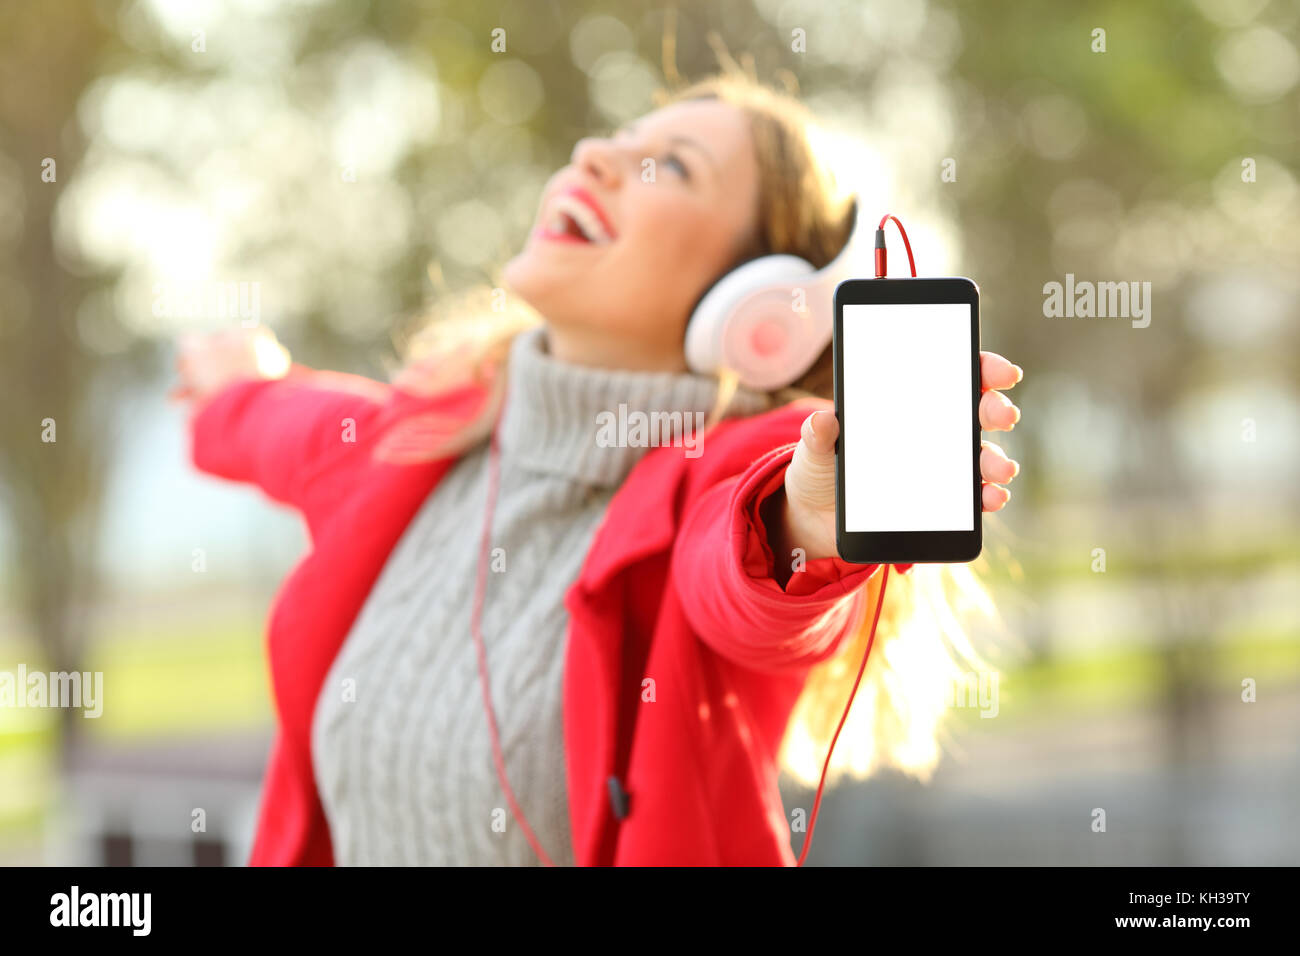 Joyful girl listening music and dancing with headphones showing a blank phone screen wearing a red jacket in winter Stock Photo